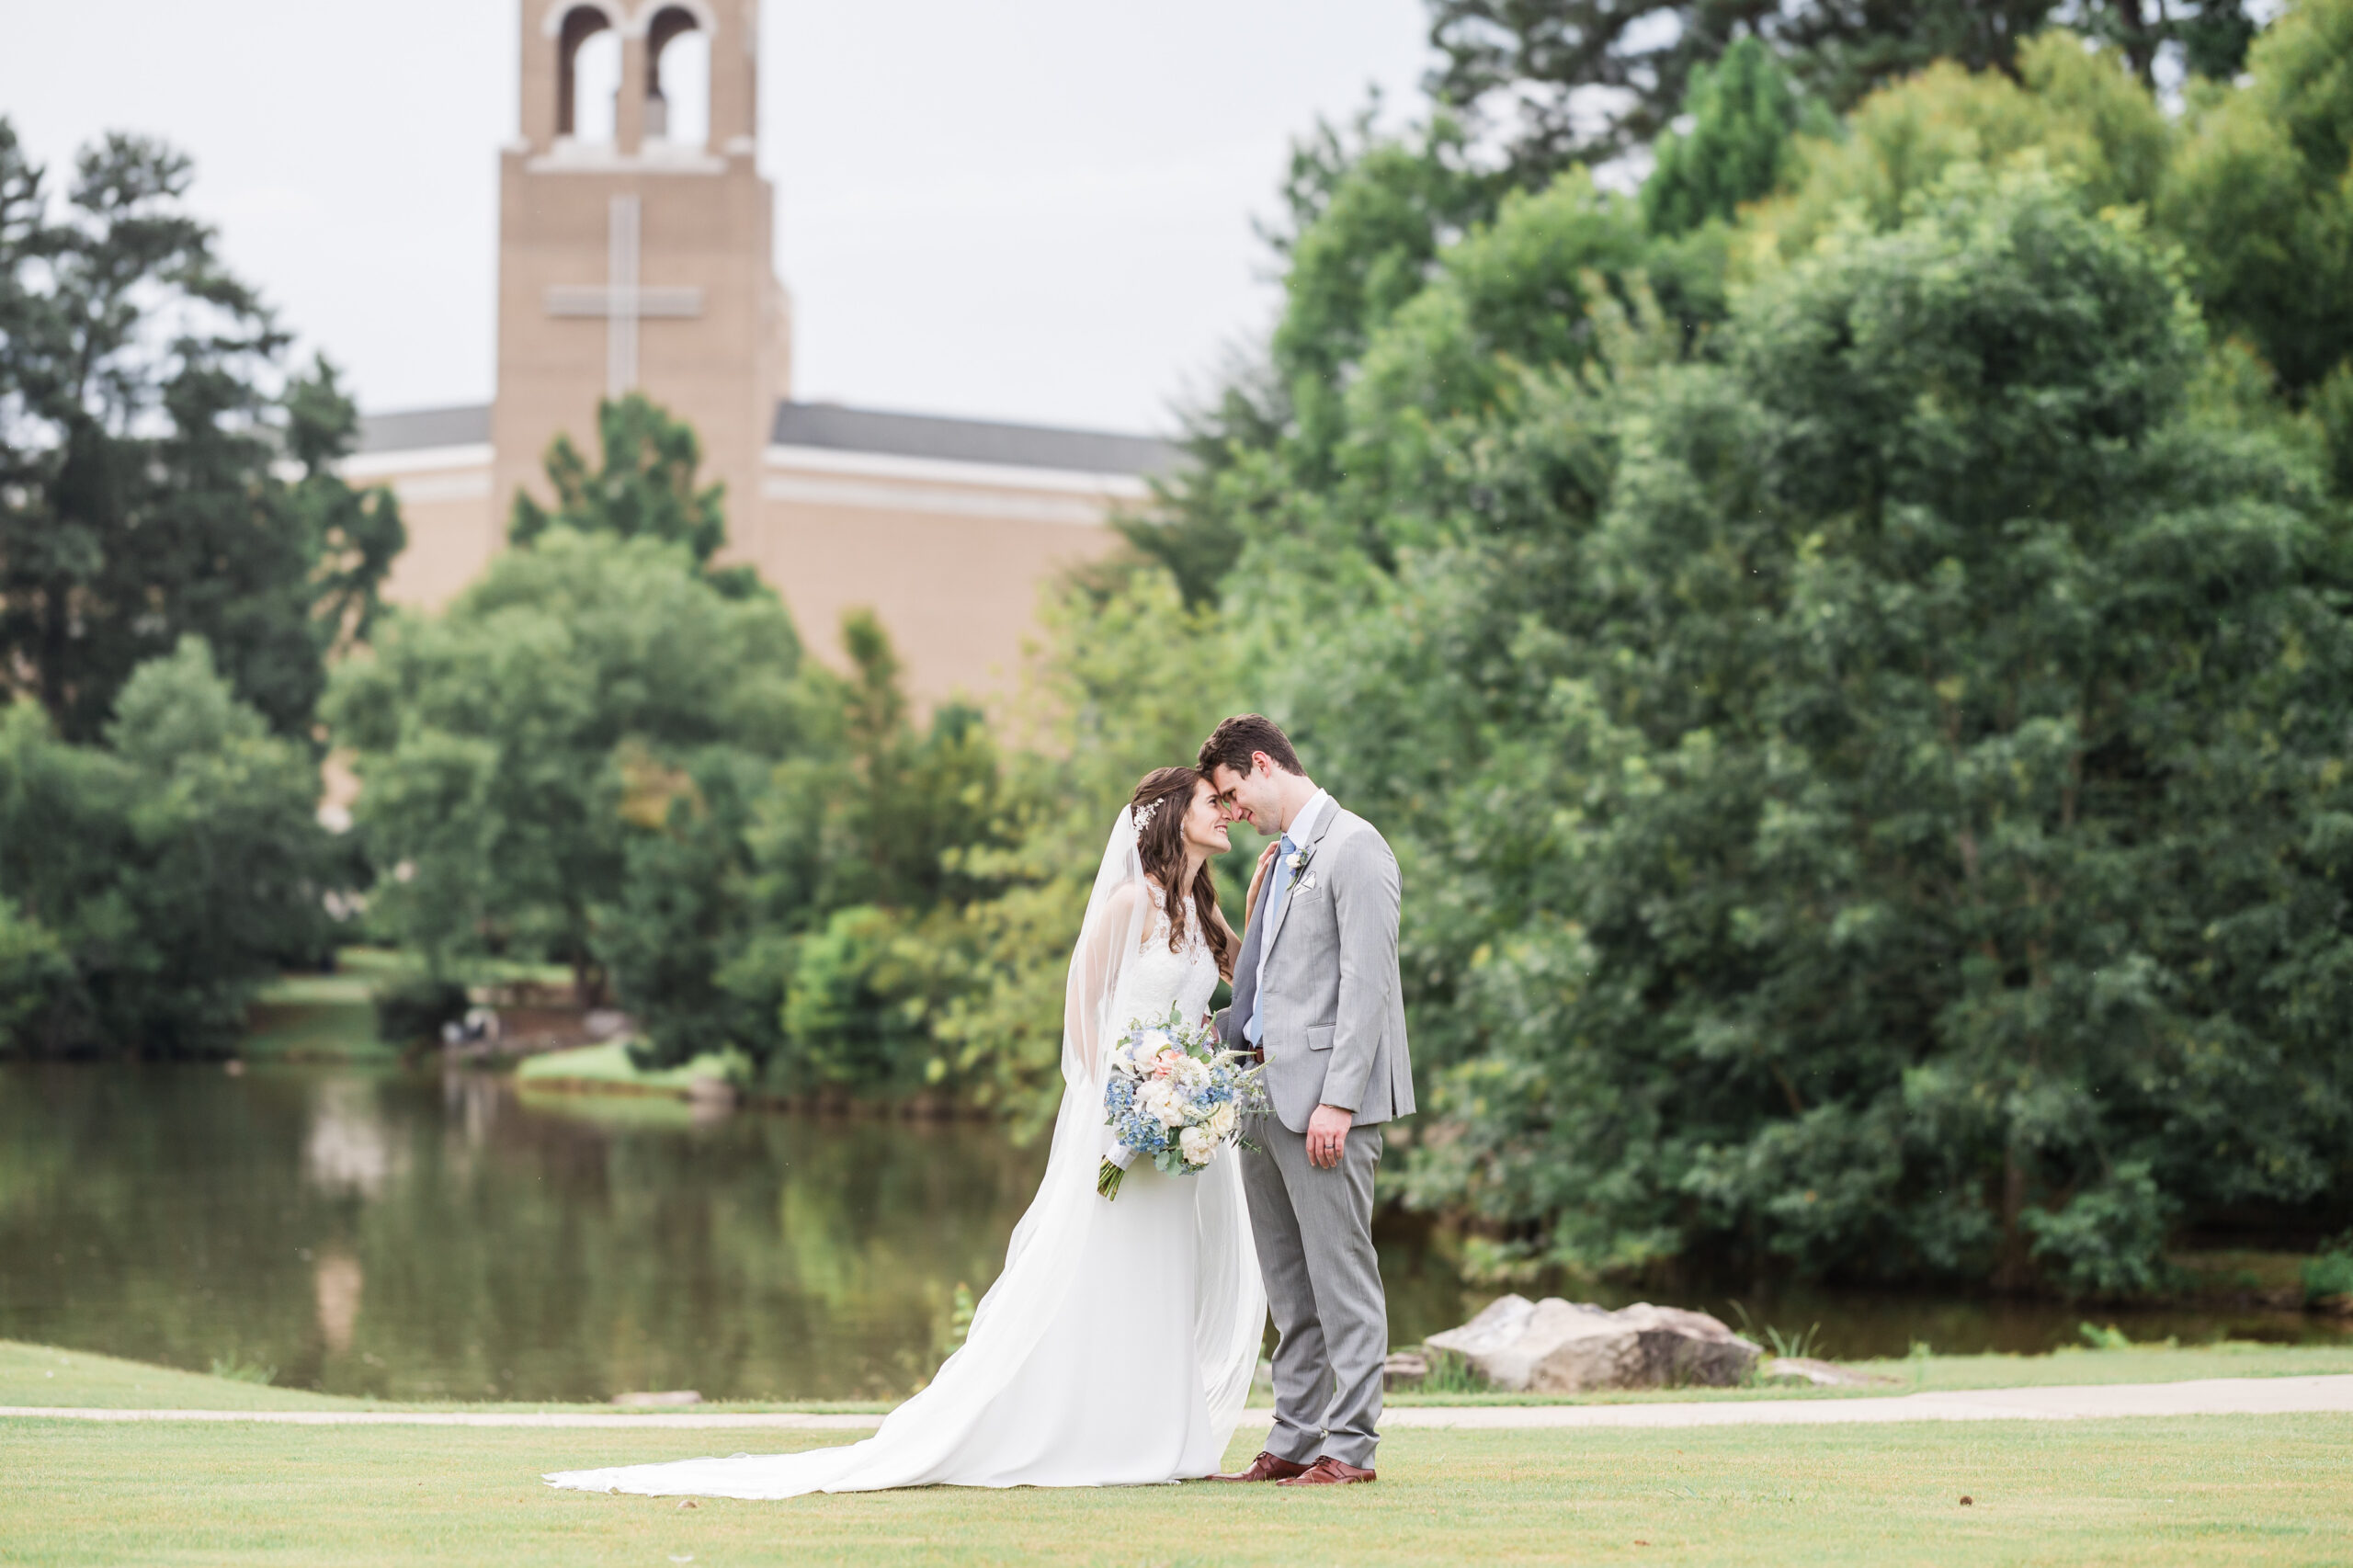 Bride and Groom put their heads together smiling with the church, lake, and the trees as their background